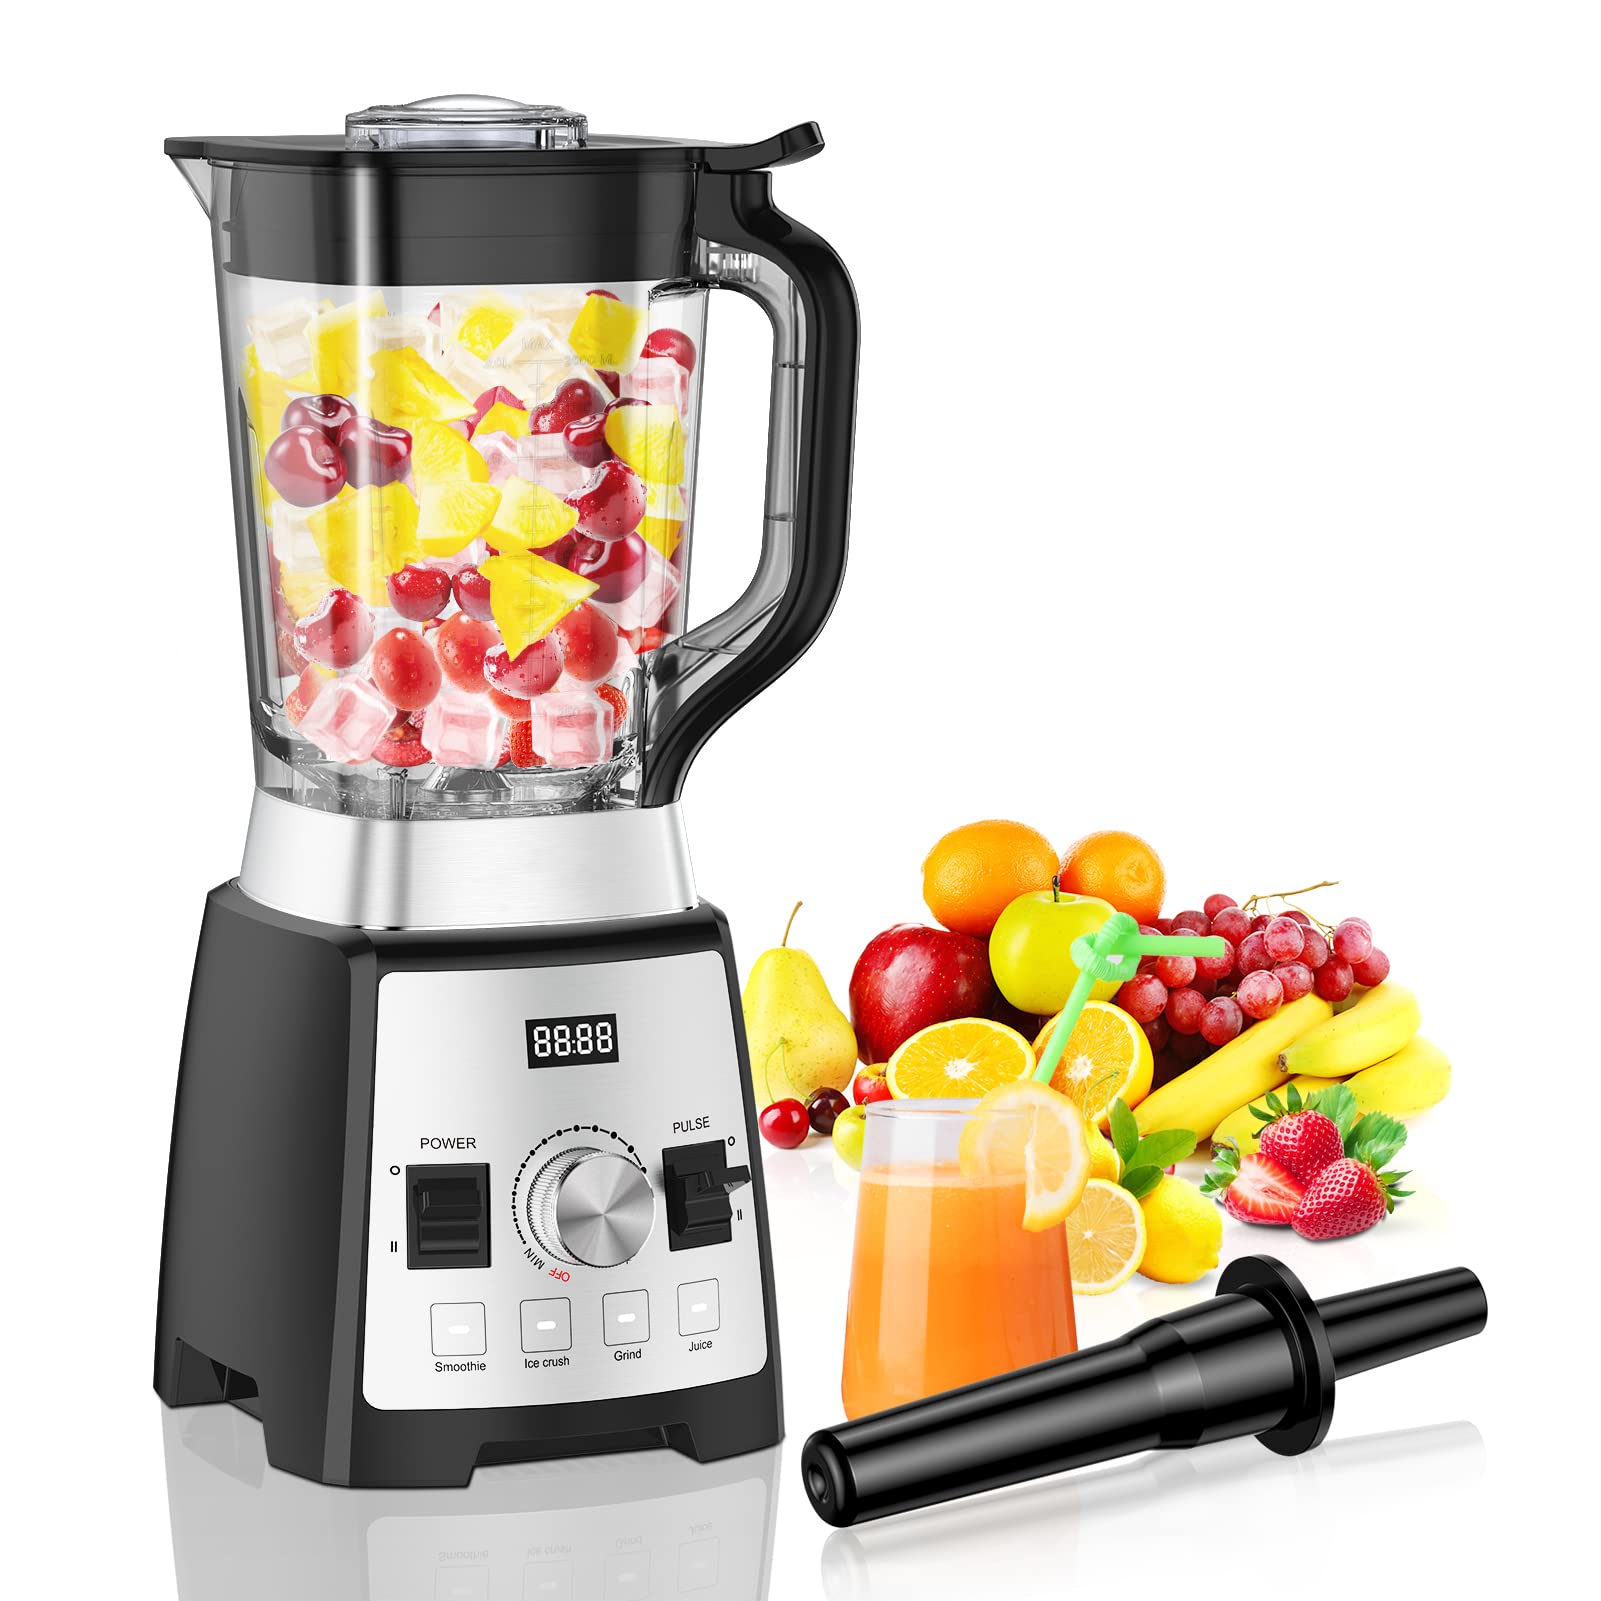 [US Direct] 1500W High Speed Smoothie Blender, Kitchen Countertop Blender with 4 Presets for Fruit, Ice Crushing, Shakes